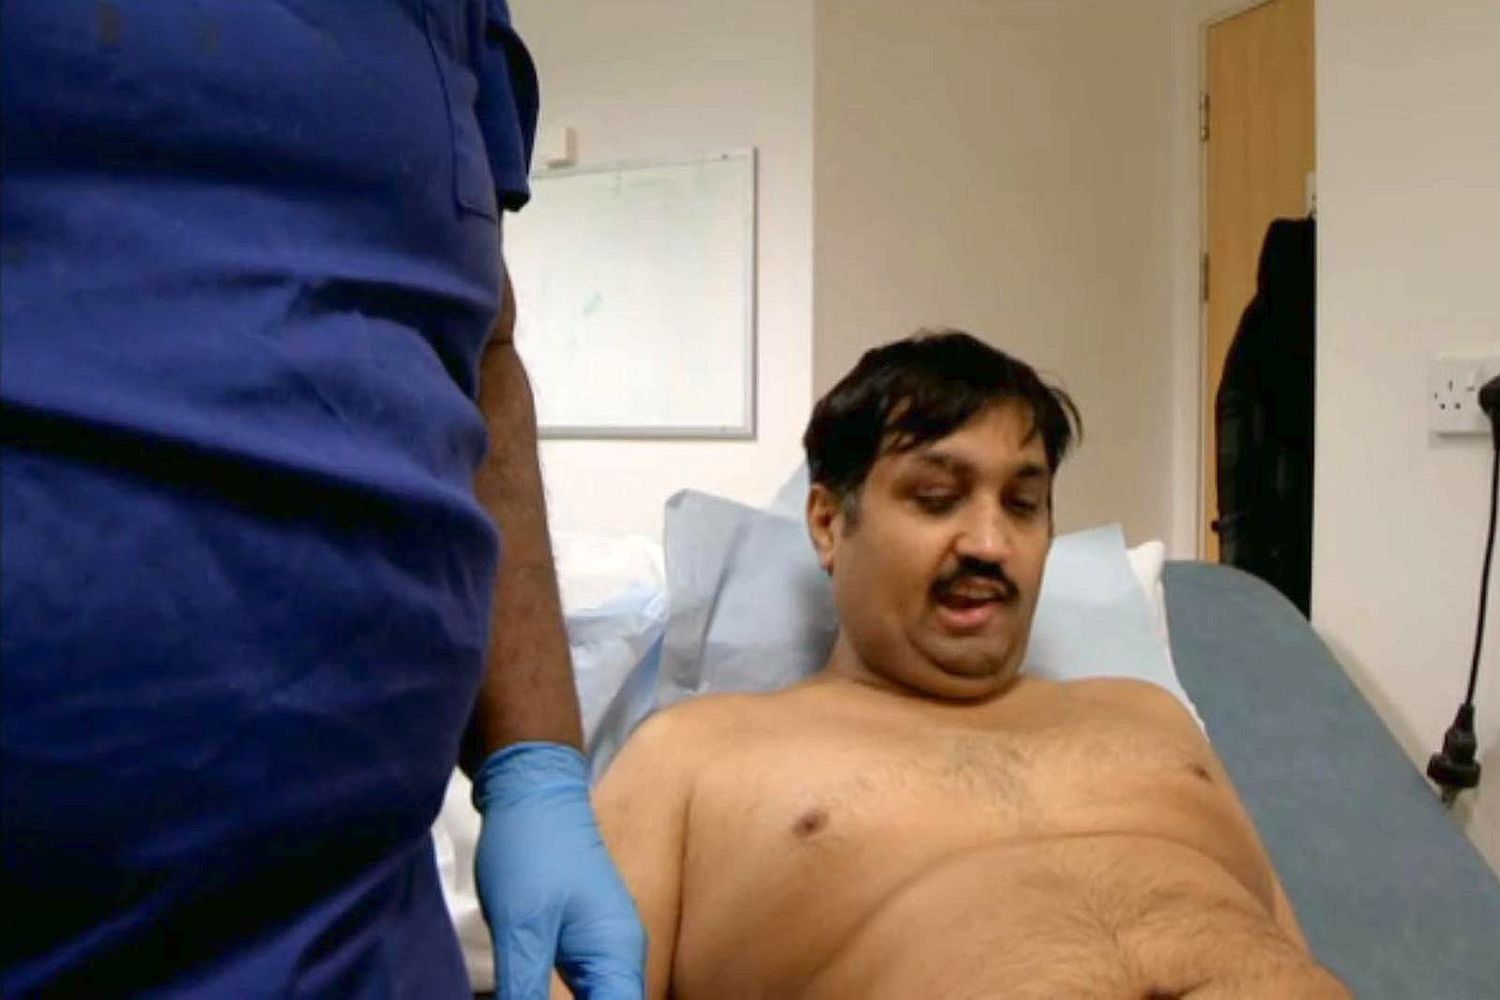 Mohammed Abad’s manhood has two tubes along its length which inflate when he presses a button on his testicle — and he can’t wait to use it. He said: “When you want a bit of action you press the ‘on’ button. When you are finished you press another button. It takes seconds. Doctors have told me to keep practicing.”